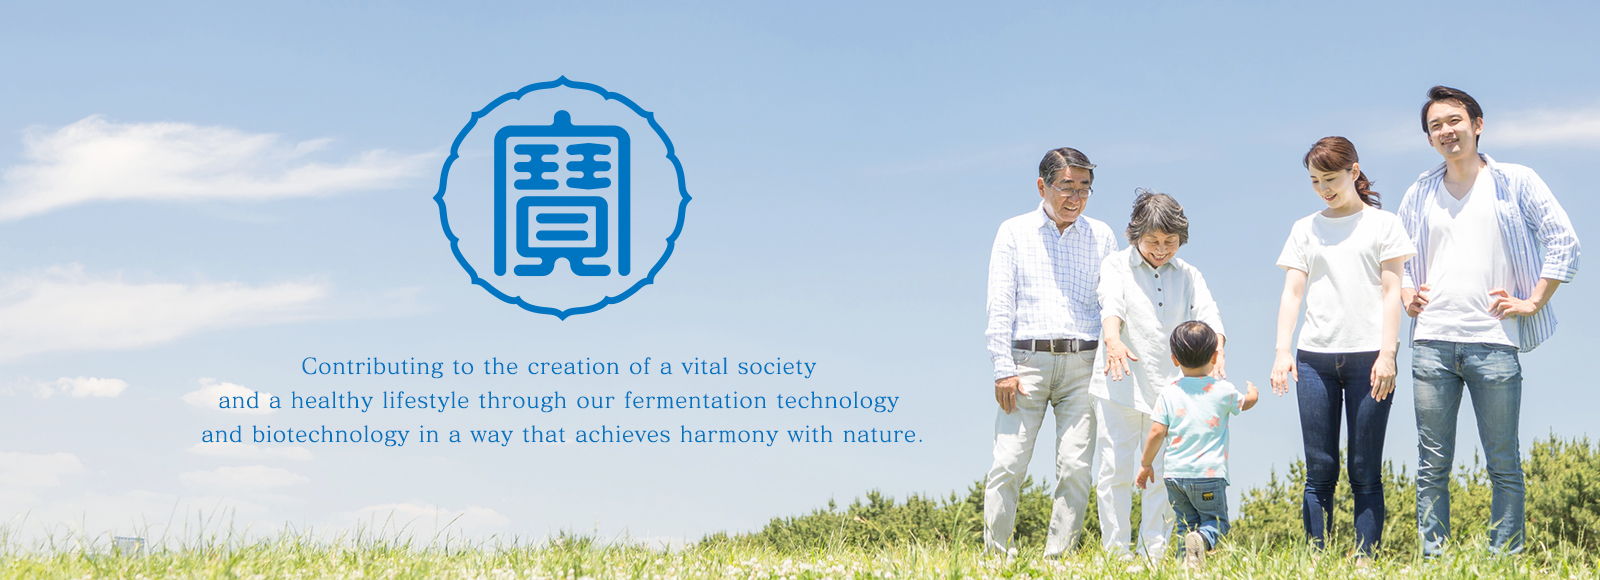 Contributing to the creation of a vital society and a healthy lifestyle through our fermentation technology and biotechnology in a way that achieves harmony with nature.